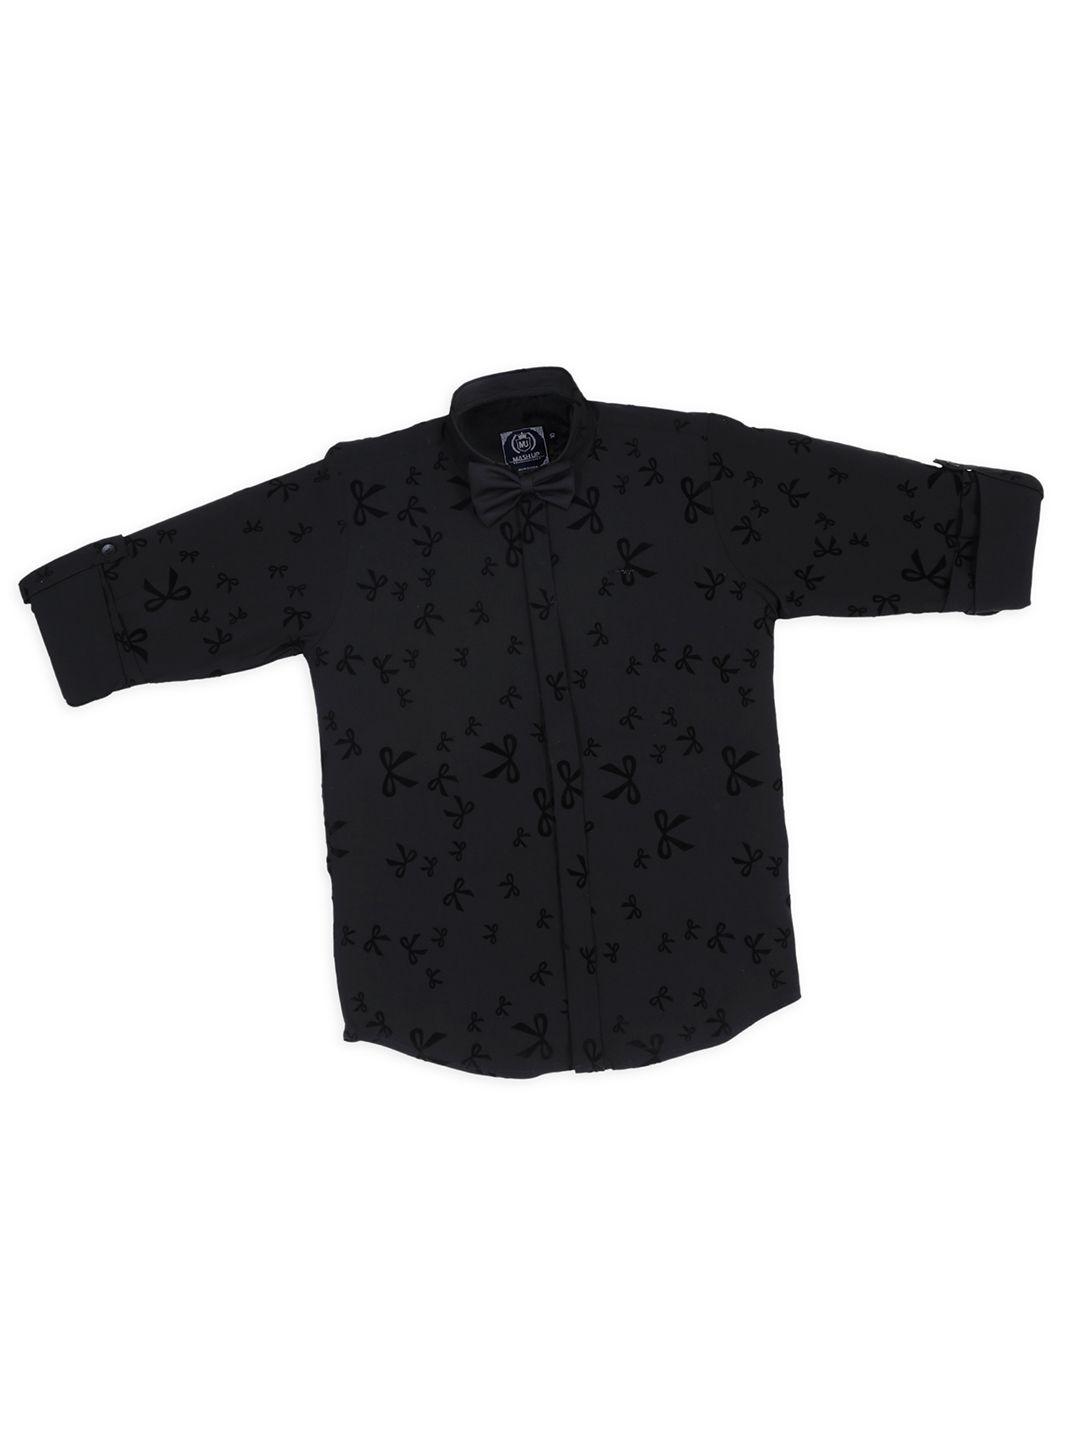 baesd boys classic floral printed casual shirt